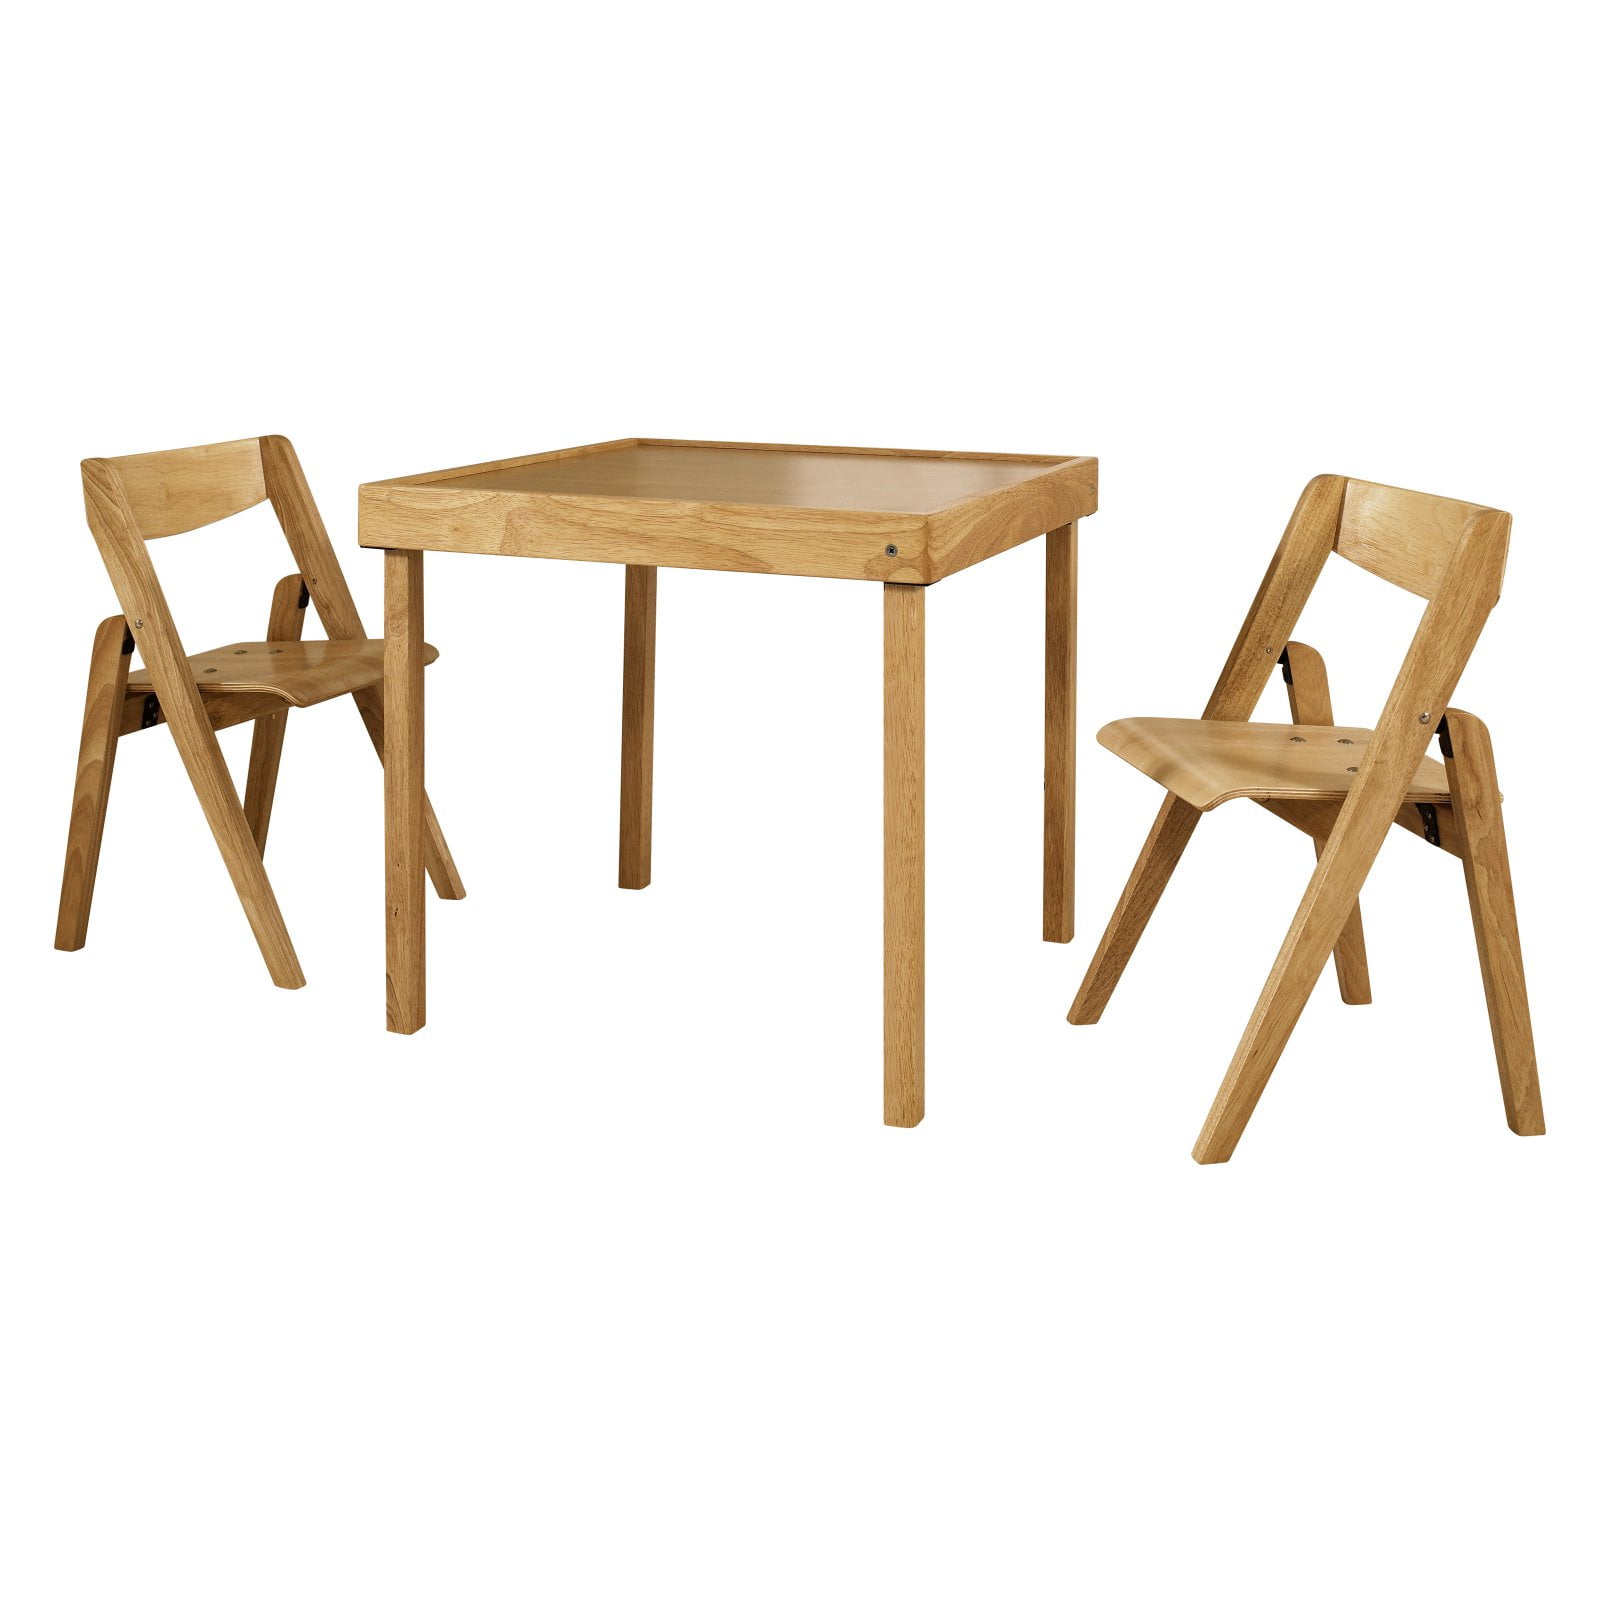 Wood Folding Chair Table : Bamboo Folding Chairs - Orlando Wedding and